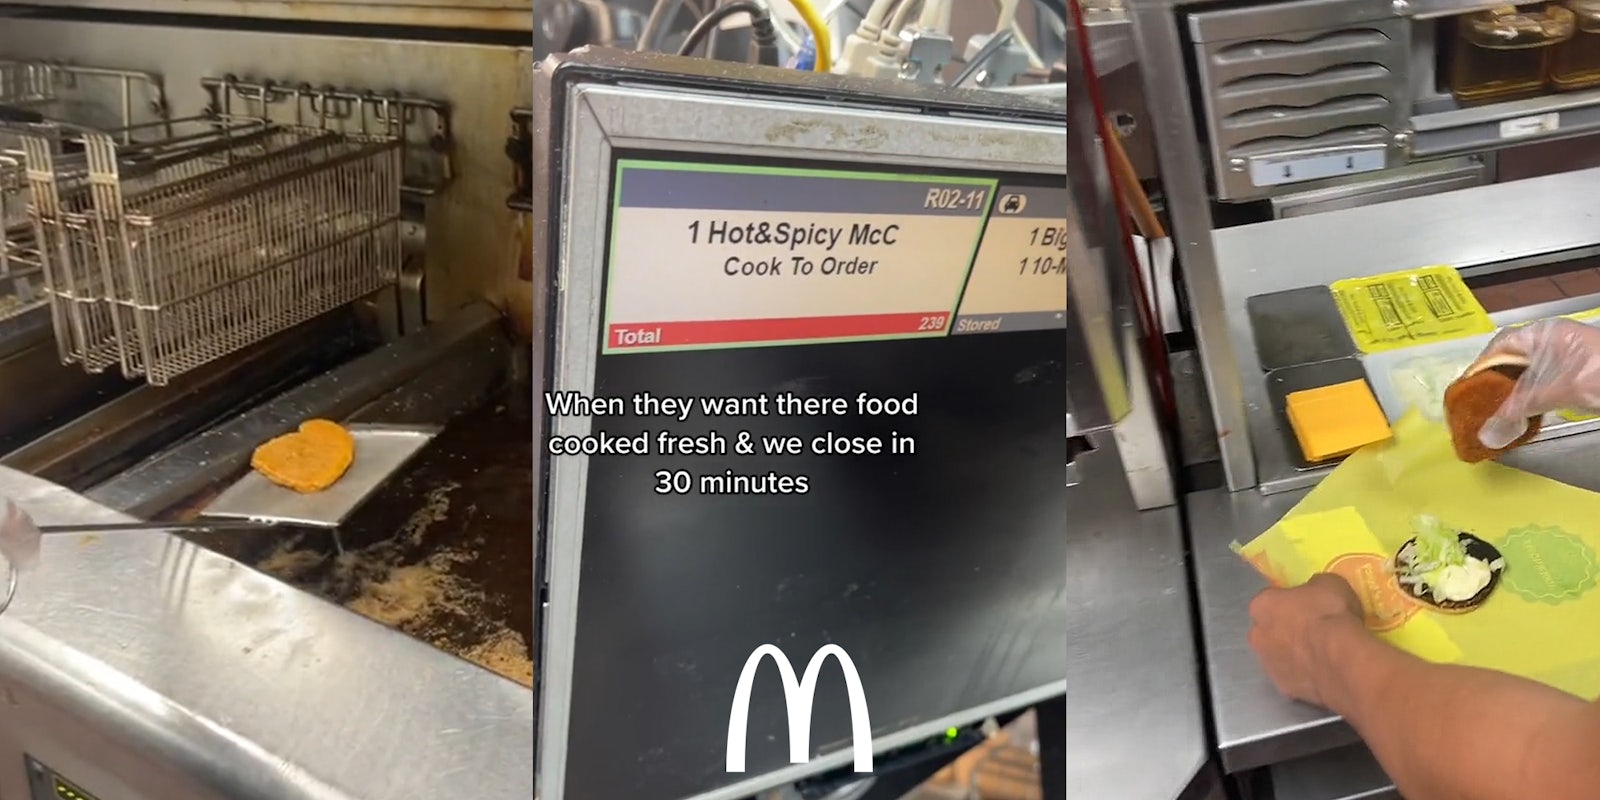 McDonald's worker taking spicy McChicken patty out of fryer (l) McDonald's order screen with order '1 Hot&Spicy McC Cook To Order' with caption 'When they want there food cooked fresh & we close in 30 minutes' with McDonald's 'm' logo at bottom (c) McDonald's employee assembling Spicy McChicken (r)